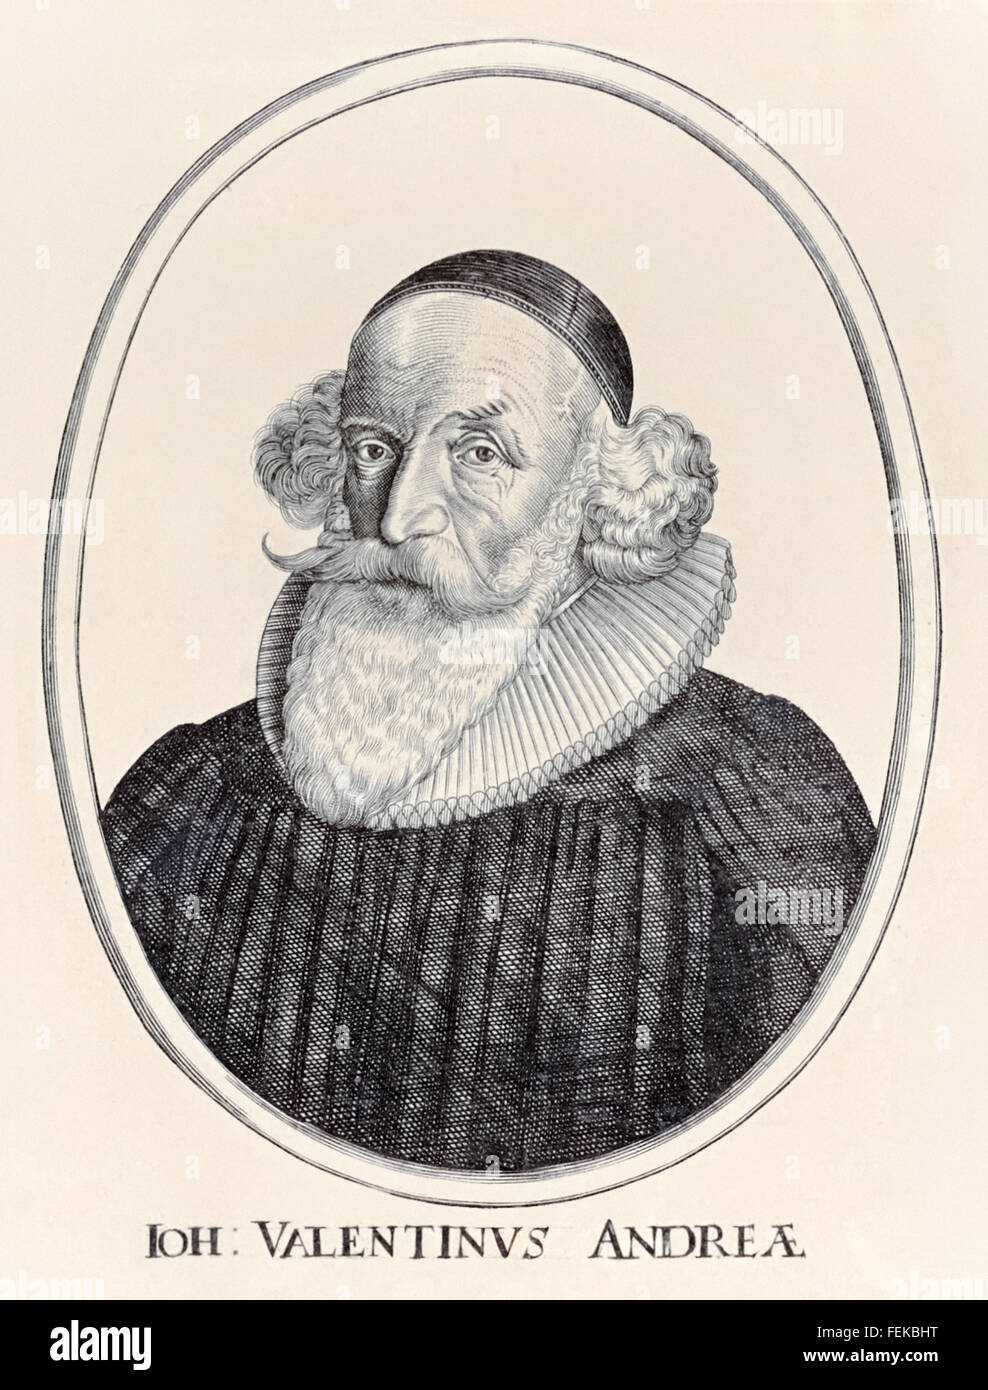 Johannes Valentinus Andreae (1586-1654), German theologian who claimed authorship of  the 'Chymical Wedding of Christian Rosenkreutz' published in 1616; one of the three original manifestos of the mysterious 'Fraternity of the Rose Cross' or  Rosicrucians). See description for more information. Stock Photo